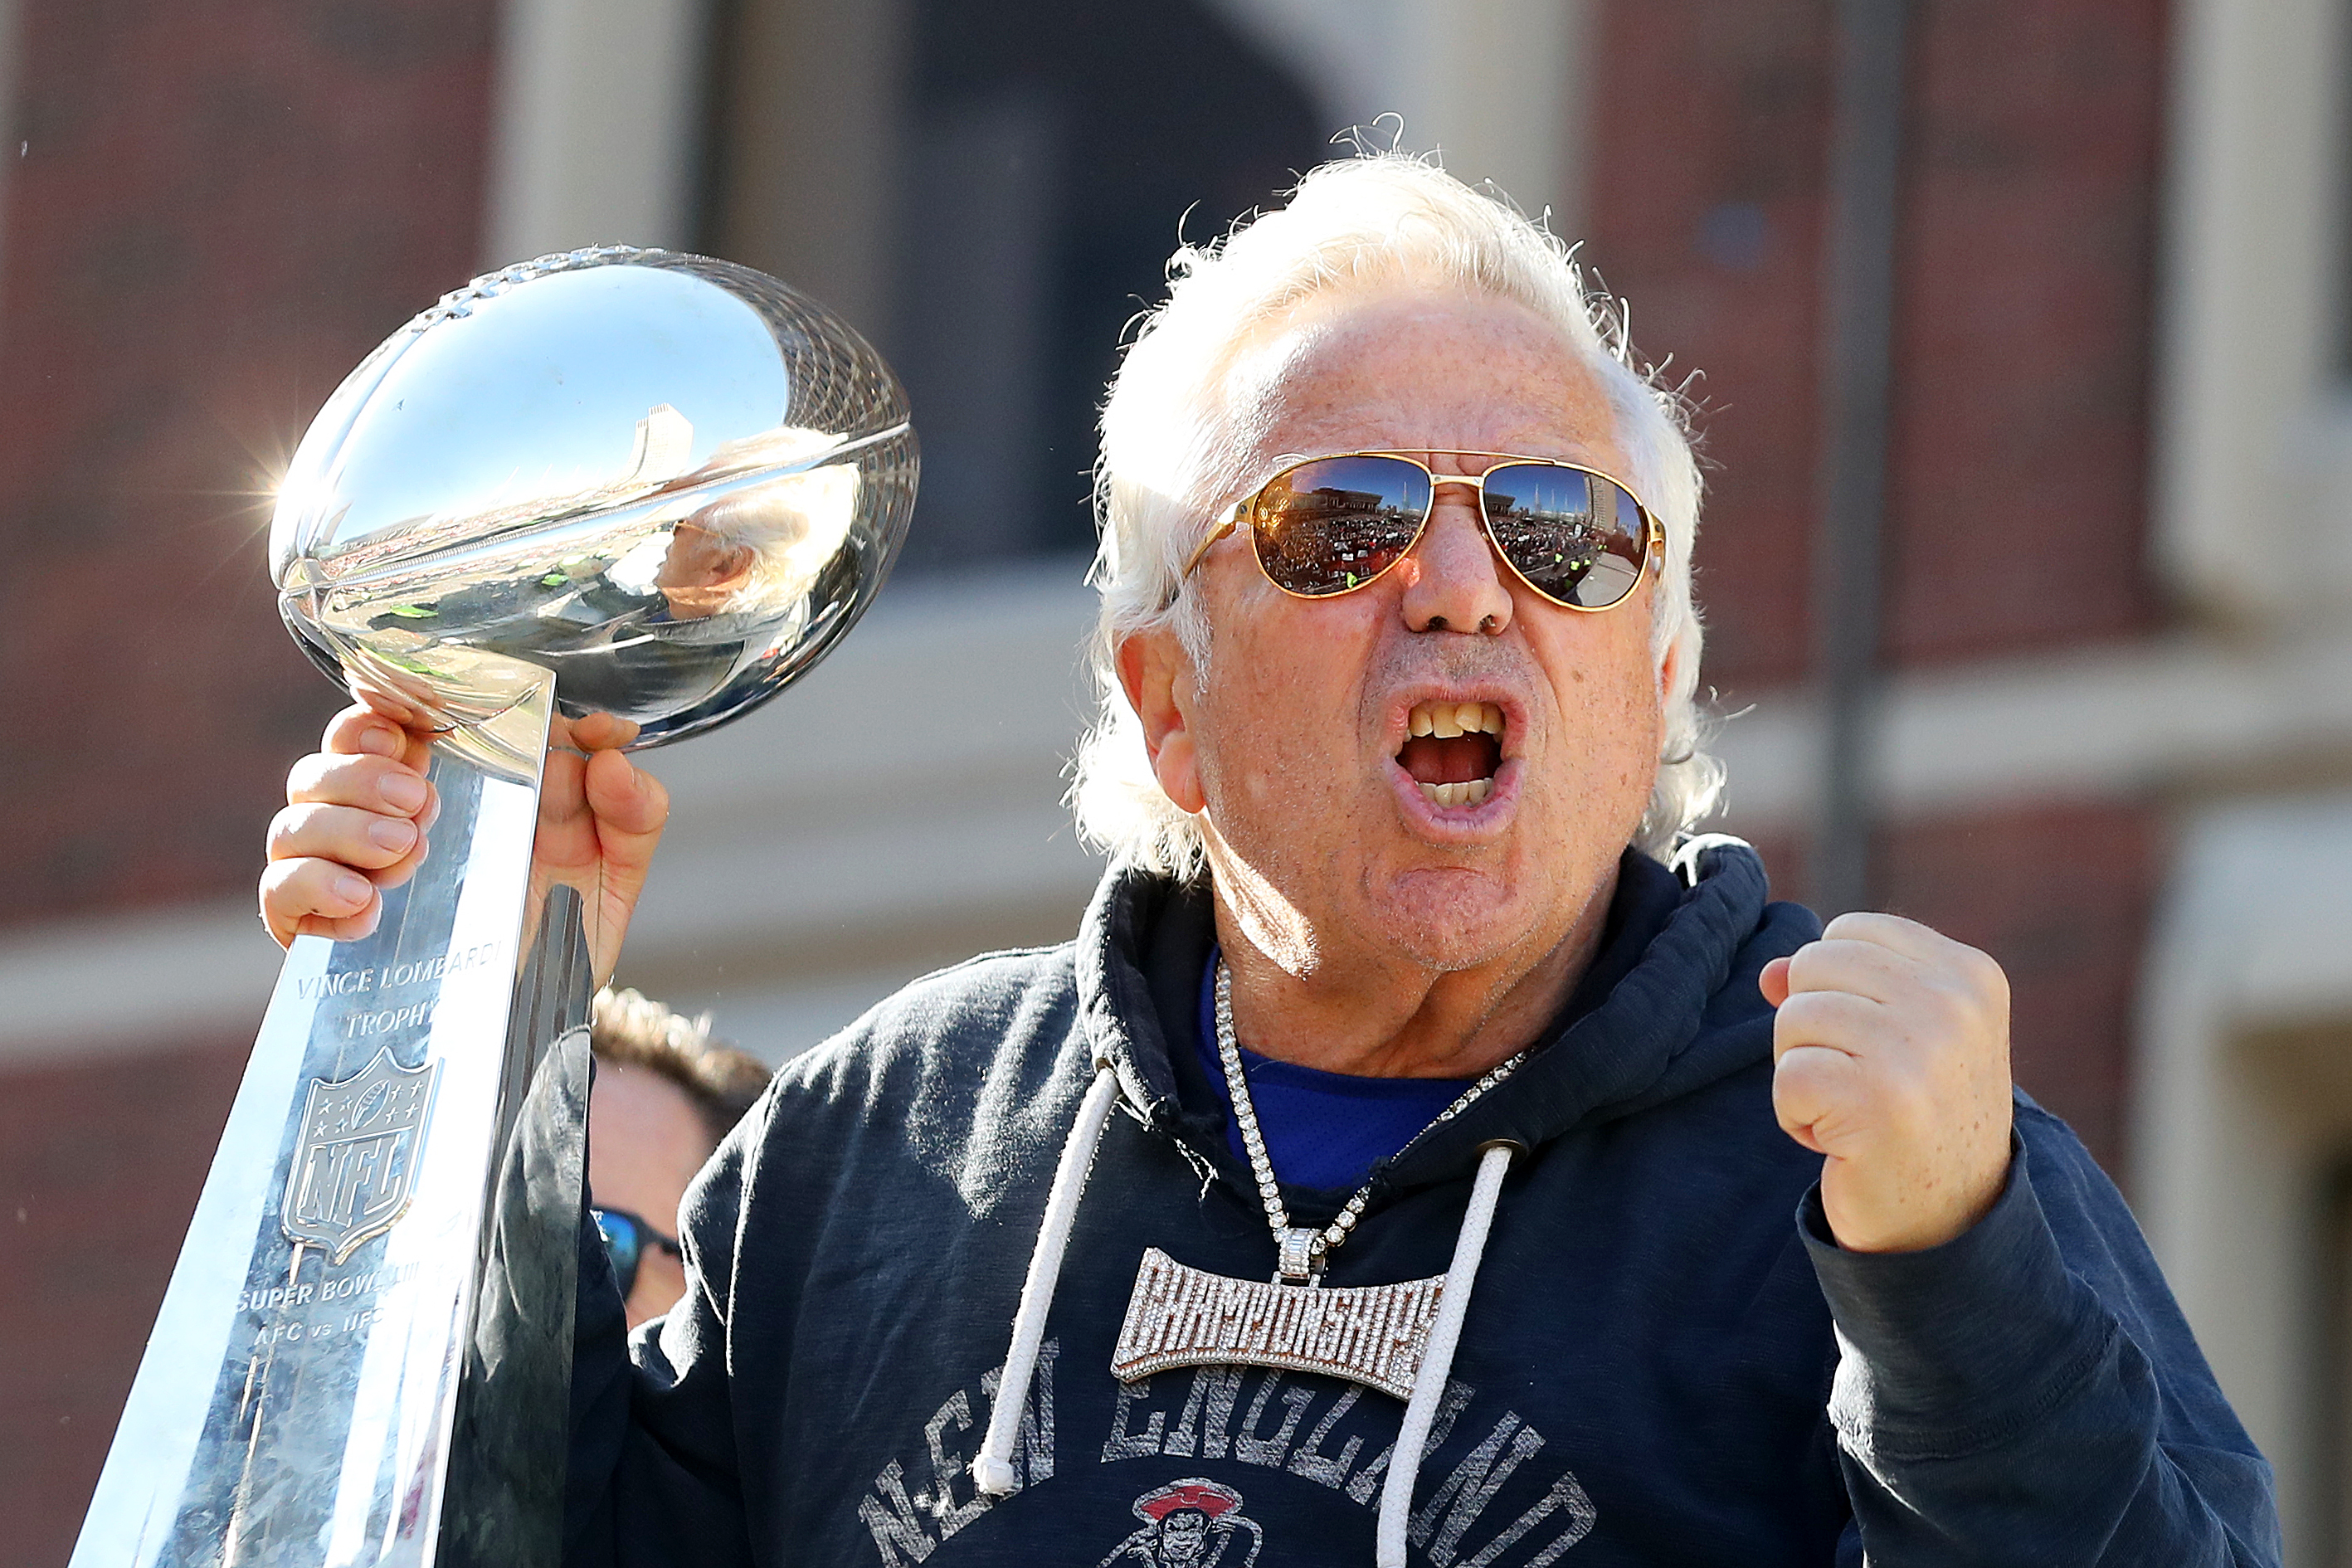 Patriots owner Robert Kraft celebrates on Cambridge street during the New England Patriots Victory Parade on Feb. 